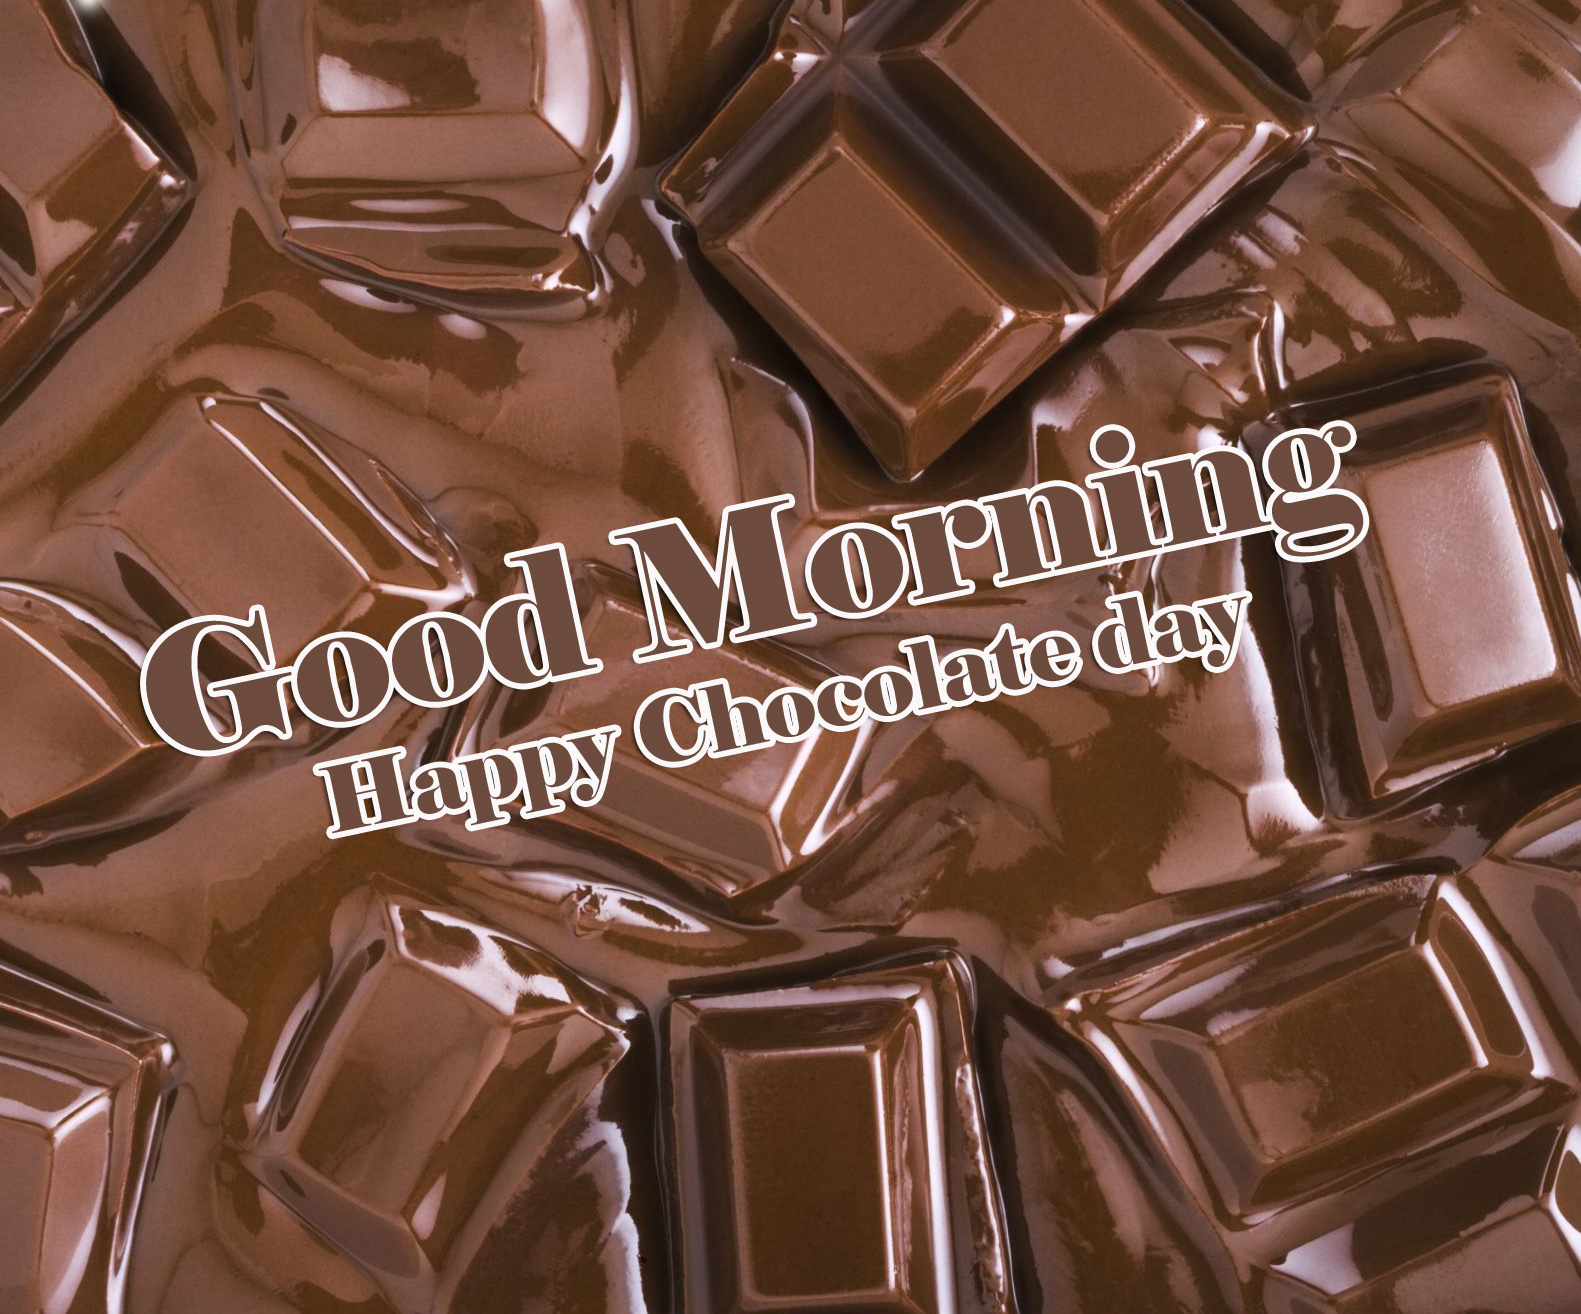 Happy Chocolate Day Good Morning Images Pics Wallpaper Free Download 